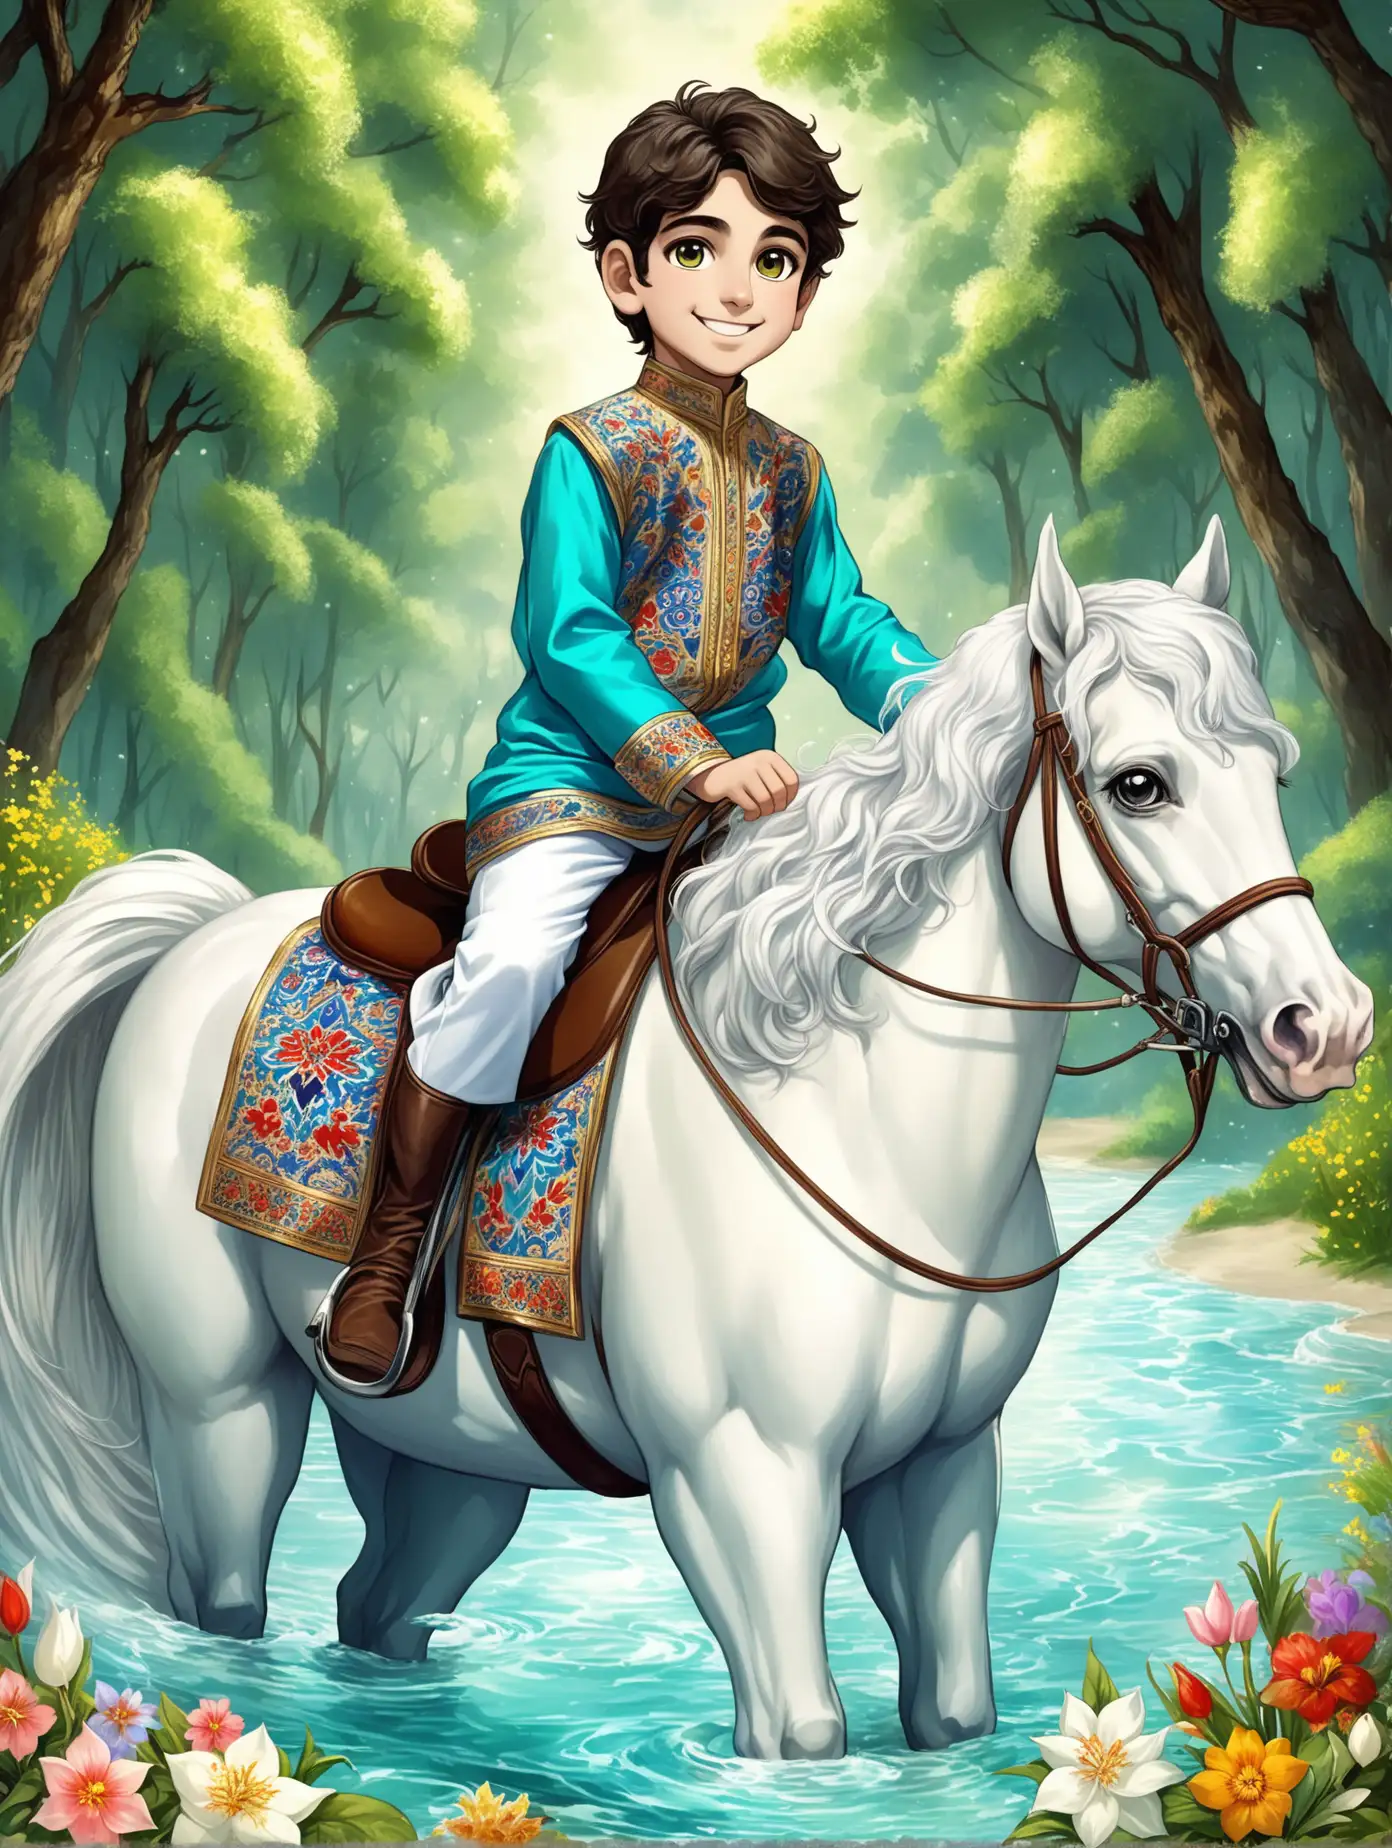 Character Persian 9 years old boy(riding horse, smaller eyes, bigger nose, white skin, cute, smiling, clothes full of Persian designs, heavenly boy).

Atmosphere beach, flowing water from the spring with flowers, forest.